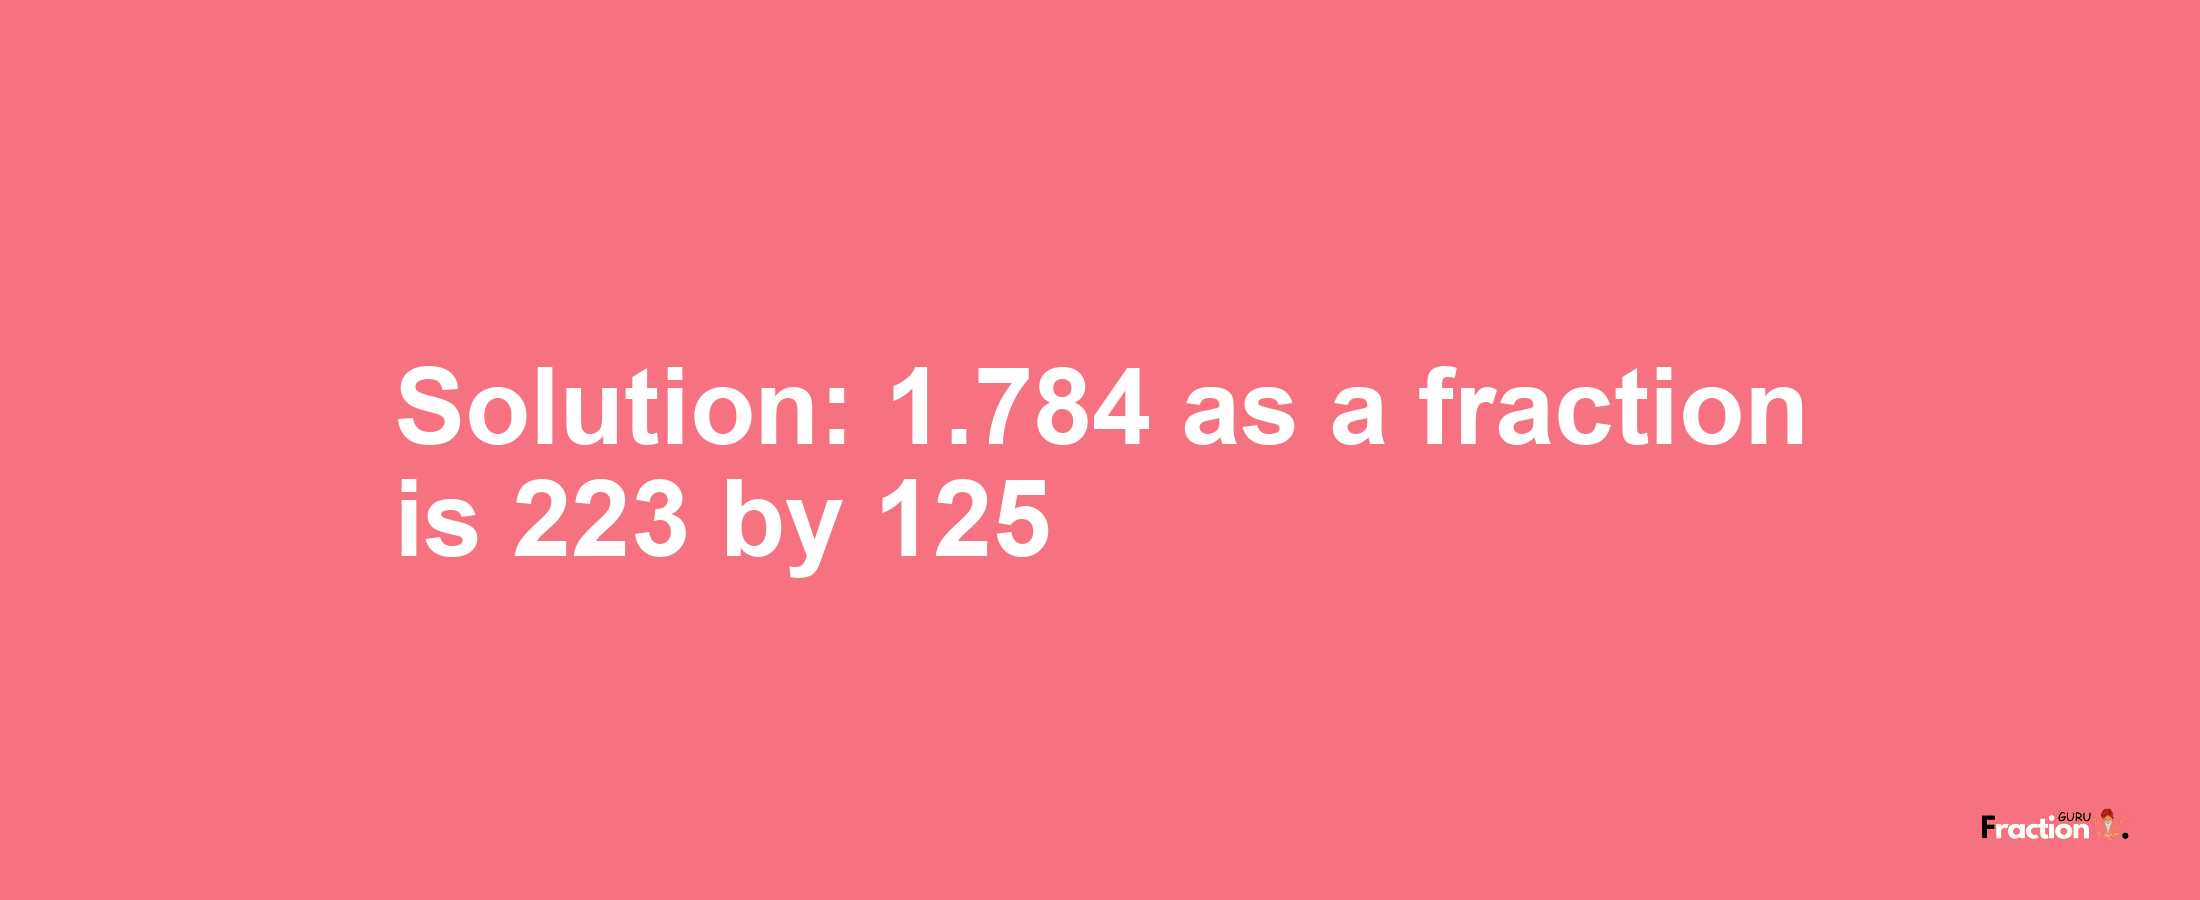 Solution:1.784 as a fraction is 223/125